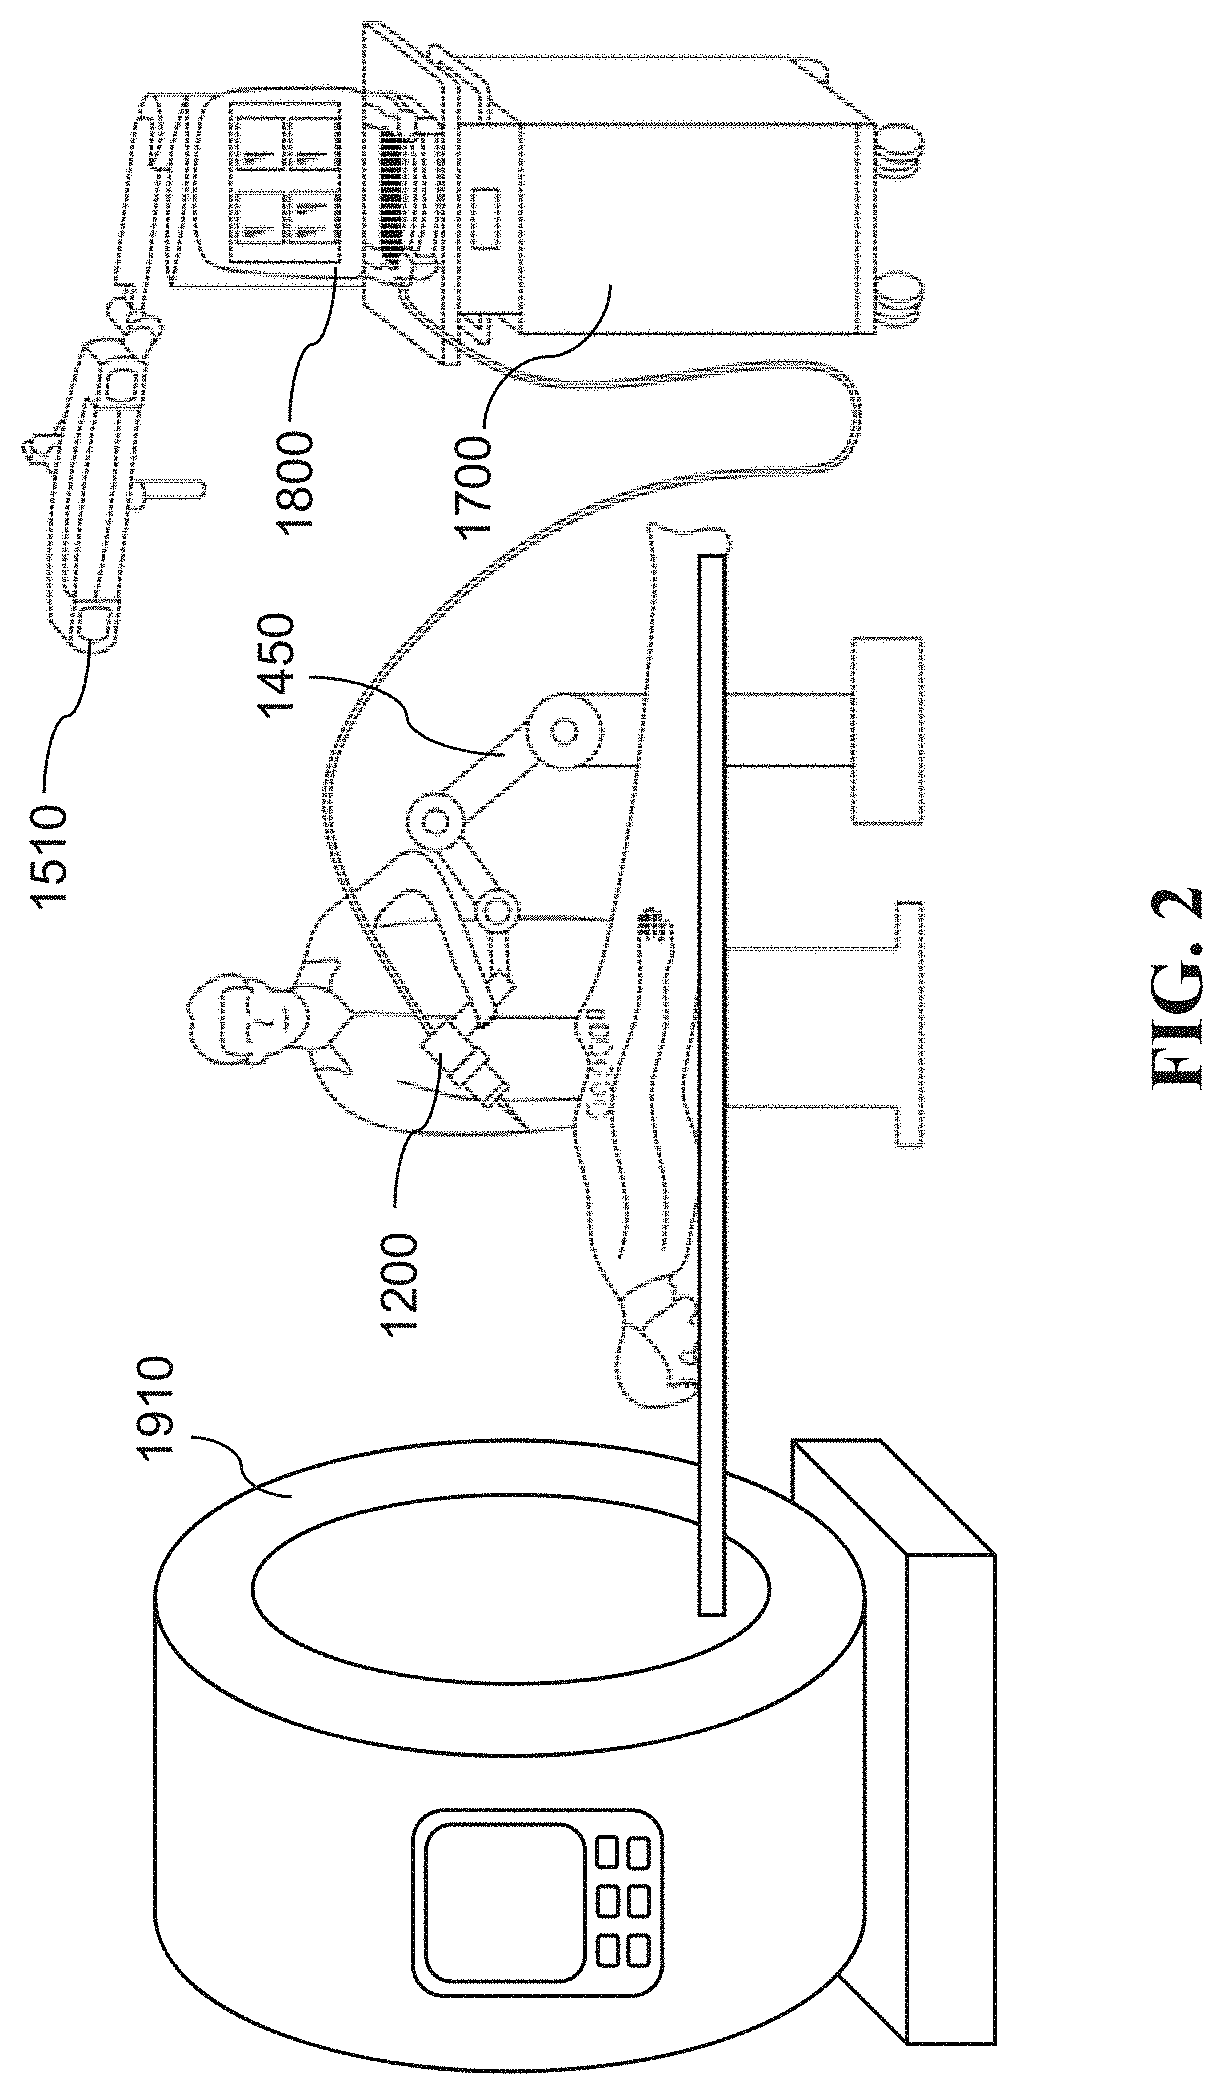 Sugery assistive system and method for obtaining surface information thereof